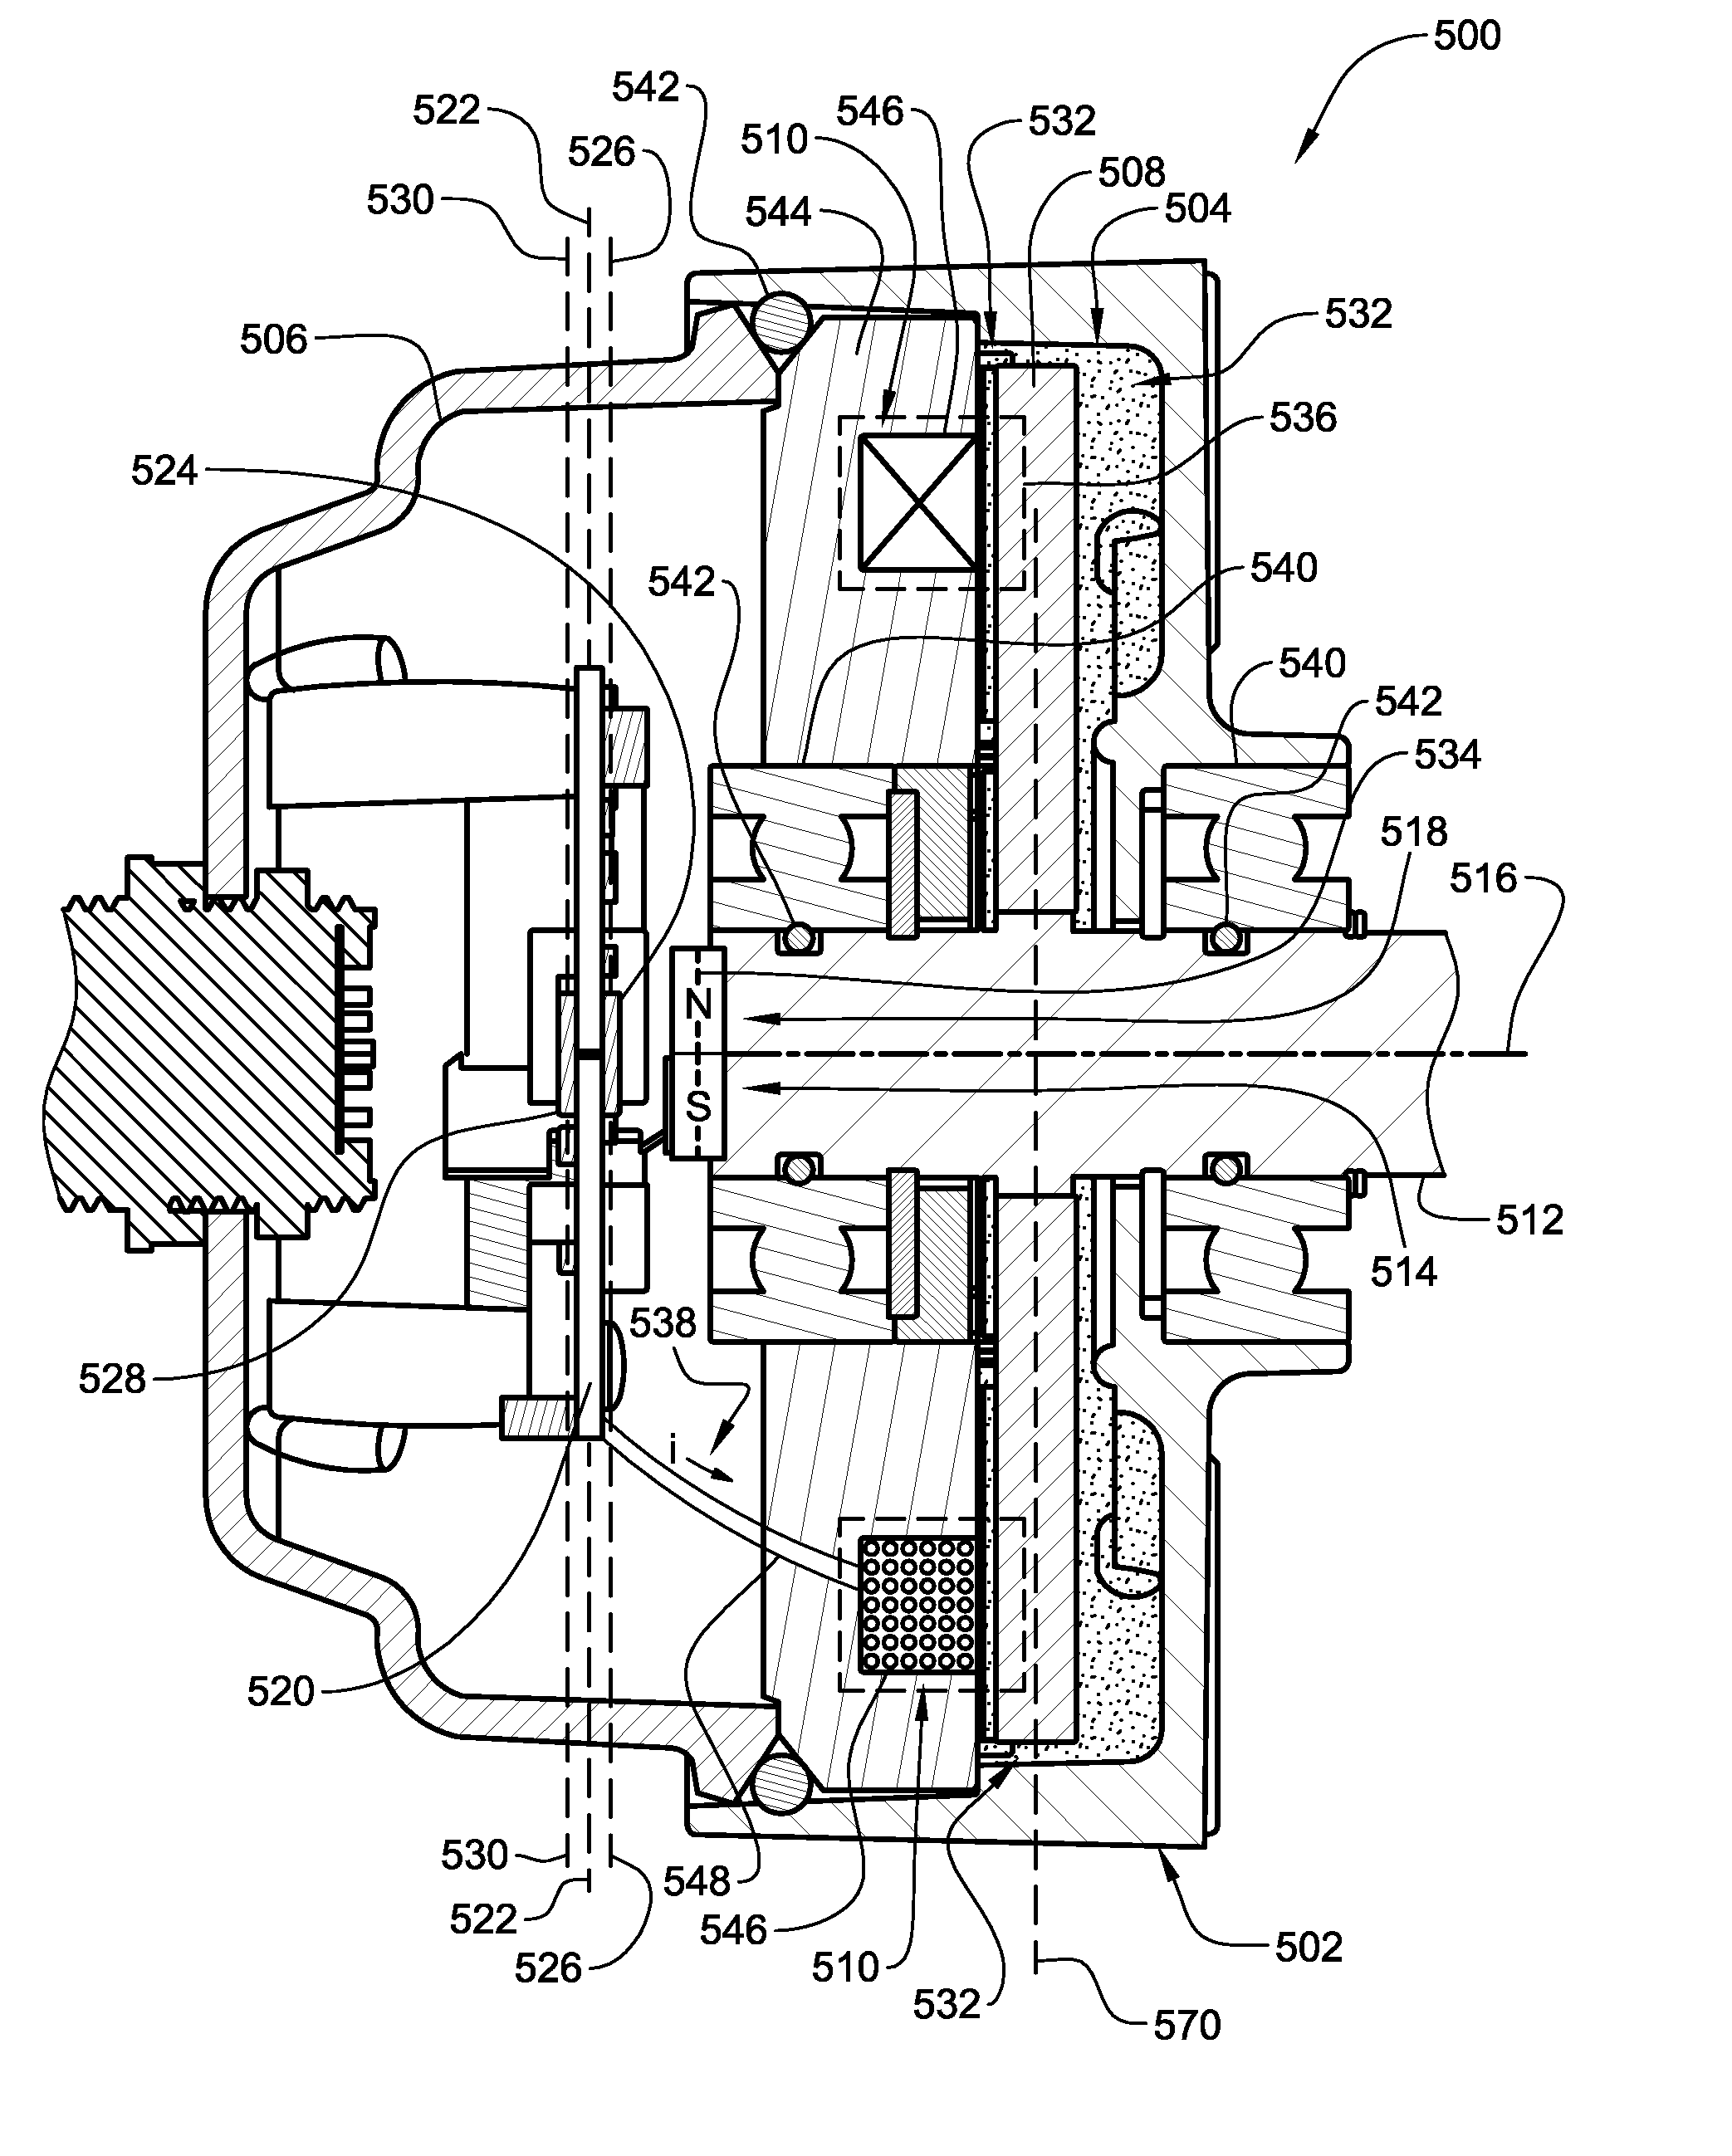 Brake with field responsive material